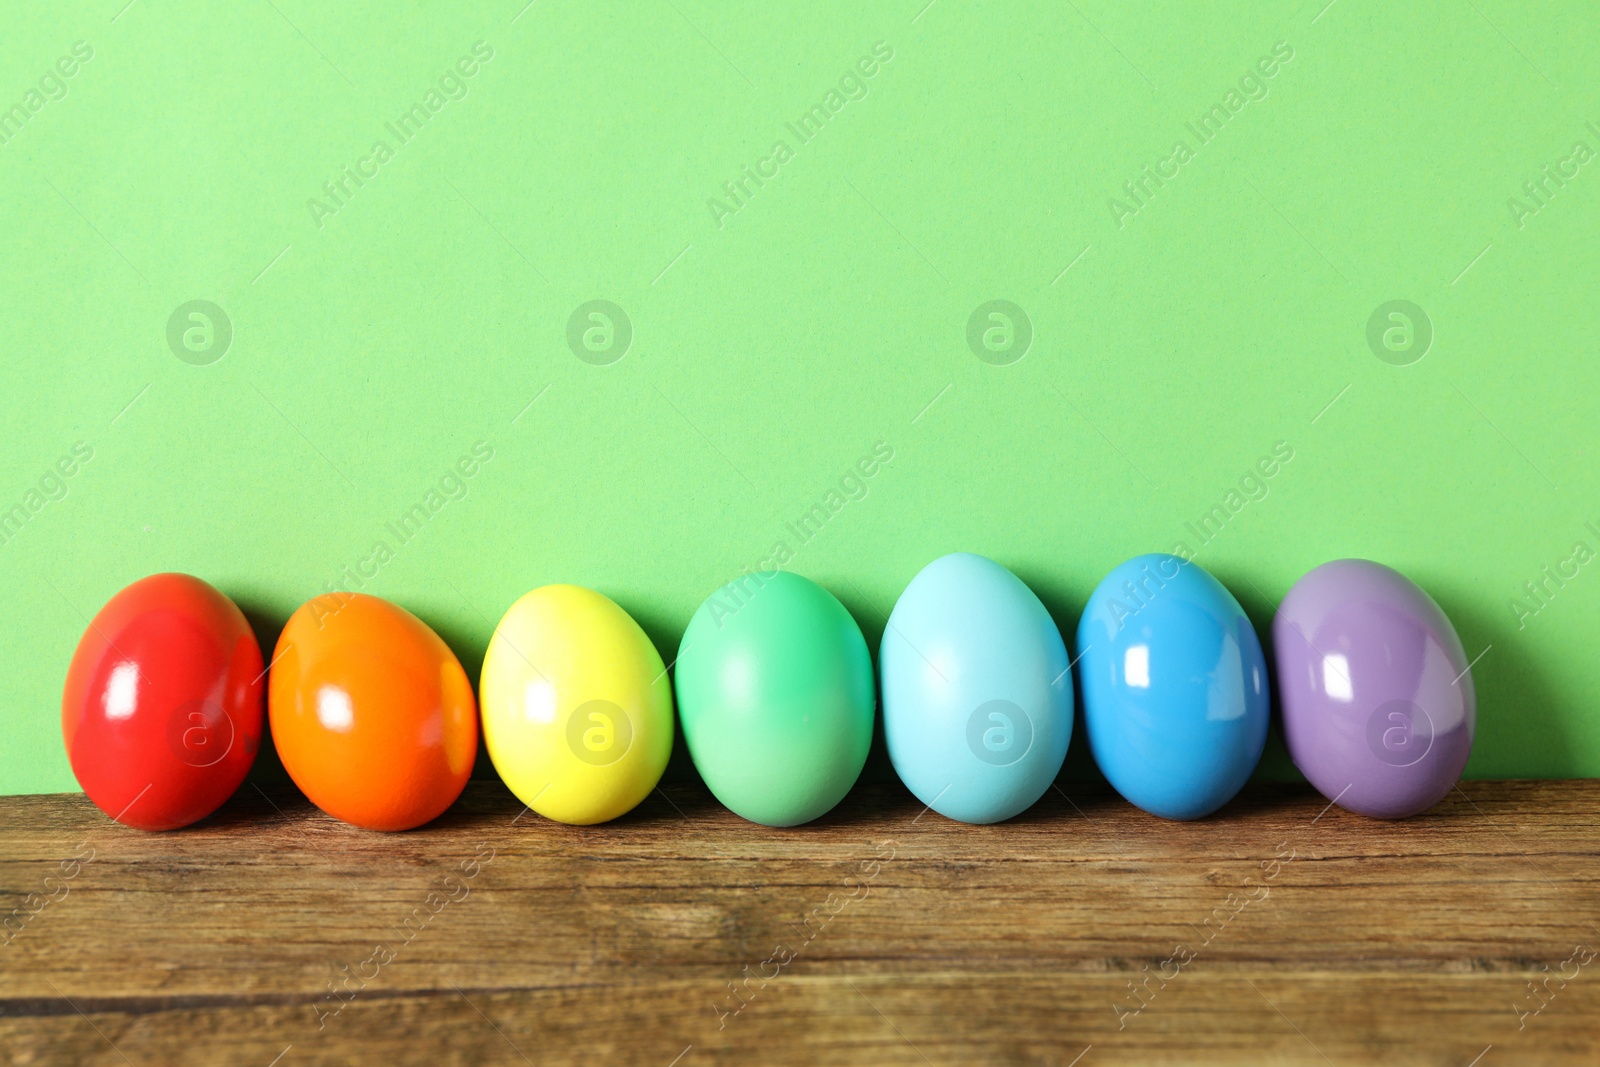 Photo of Easter eggs on wooden table against green background, space for text